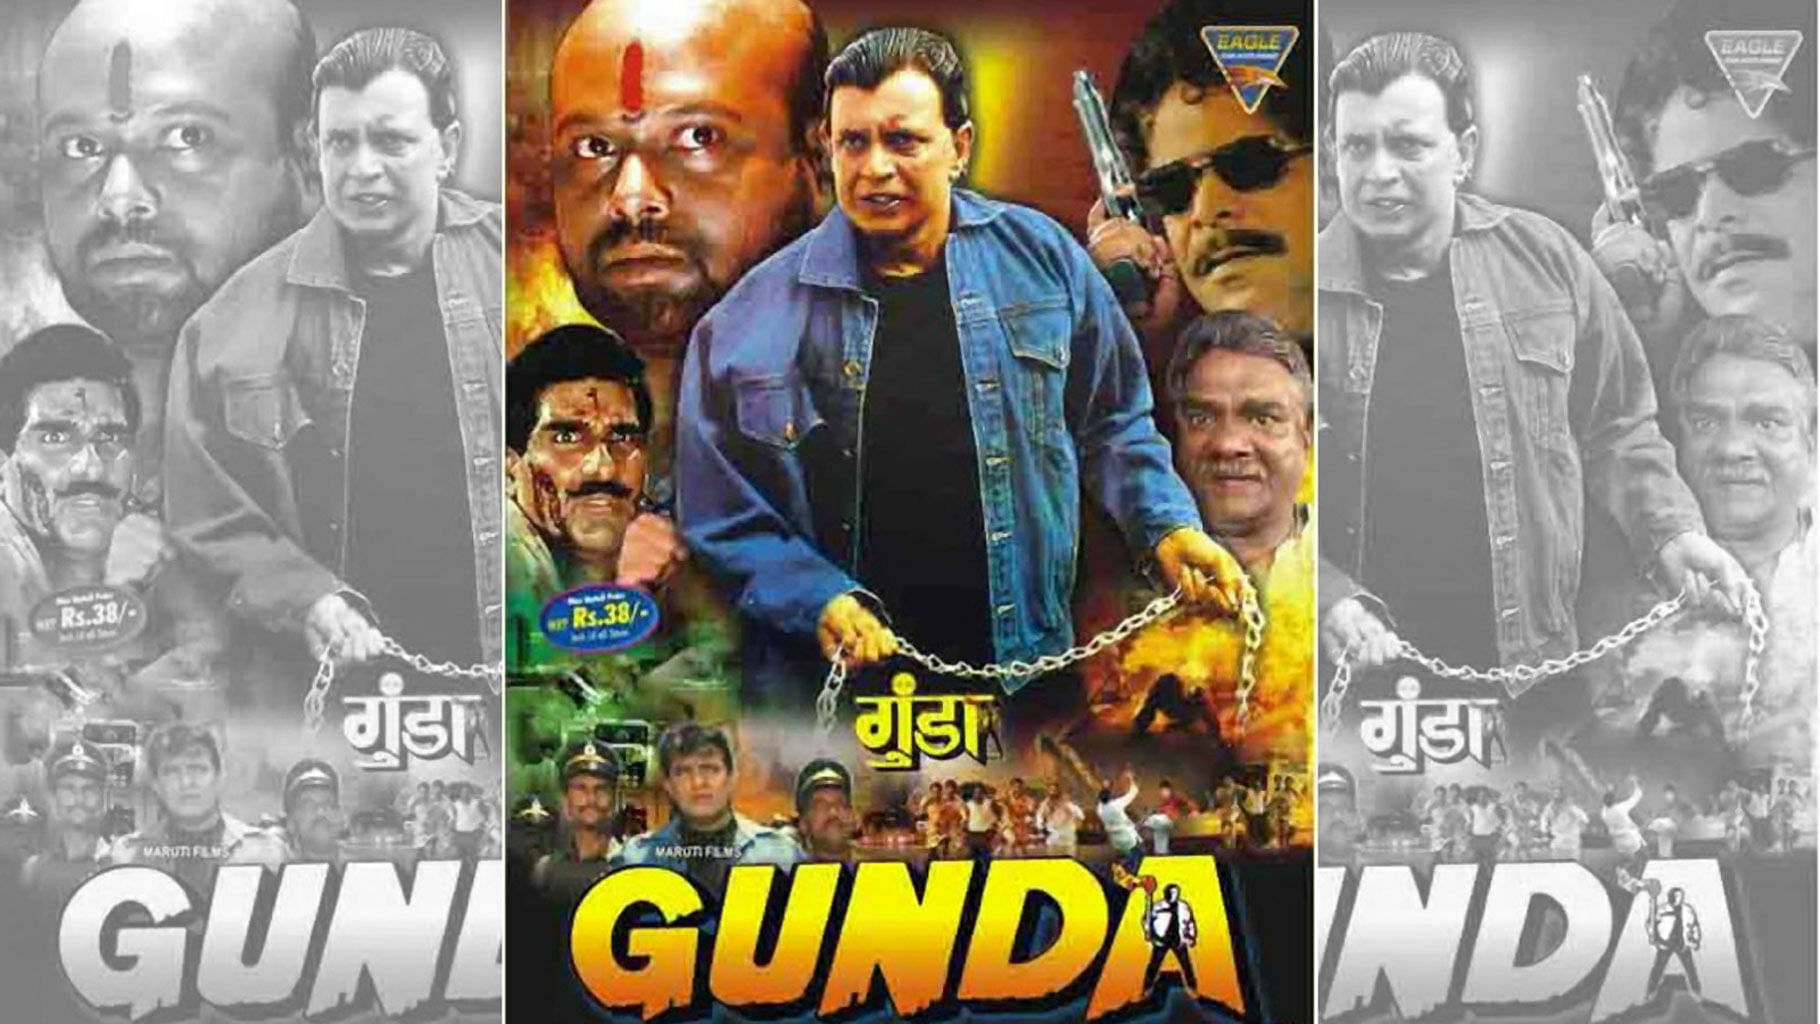 <i>Gunda </i>has acquired a cult following over the years